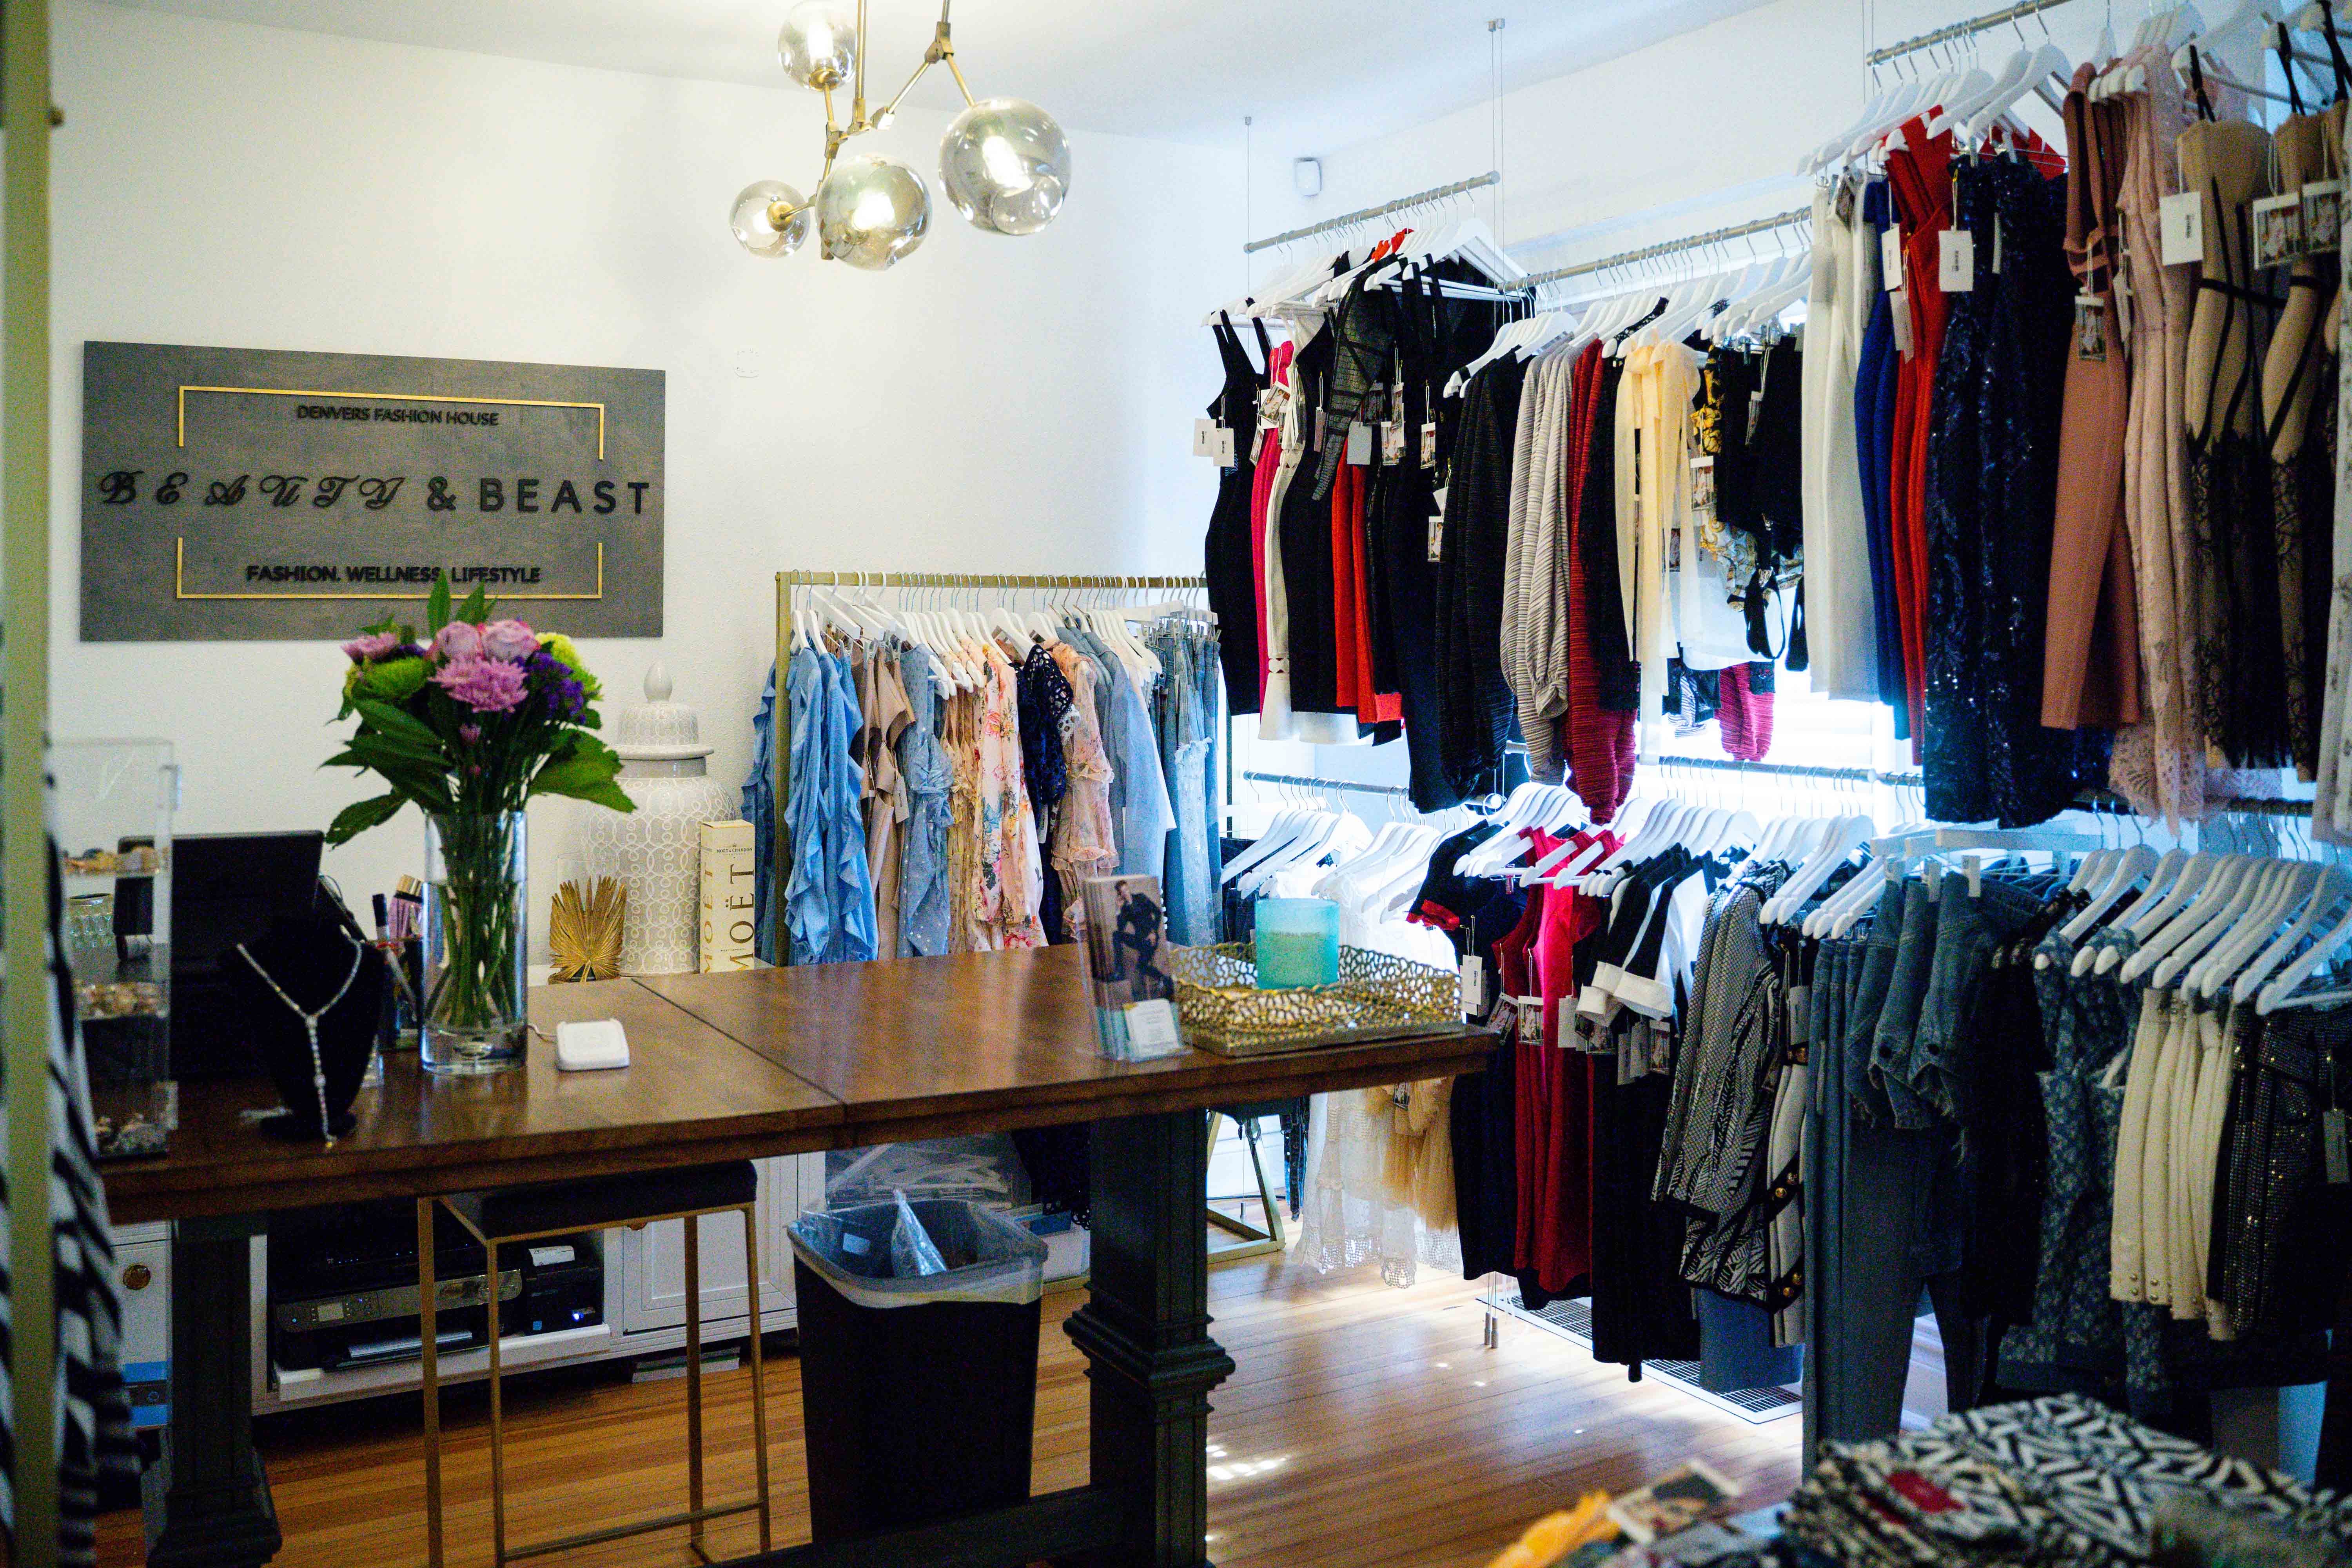 Photo of Beauty & Beast boutique in Denver